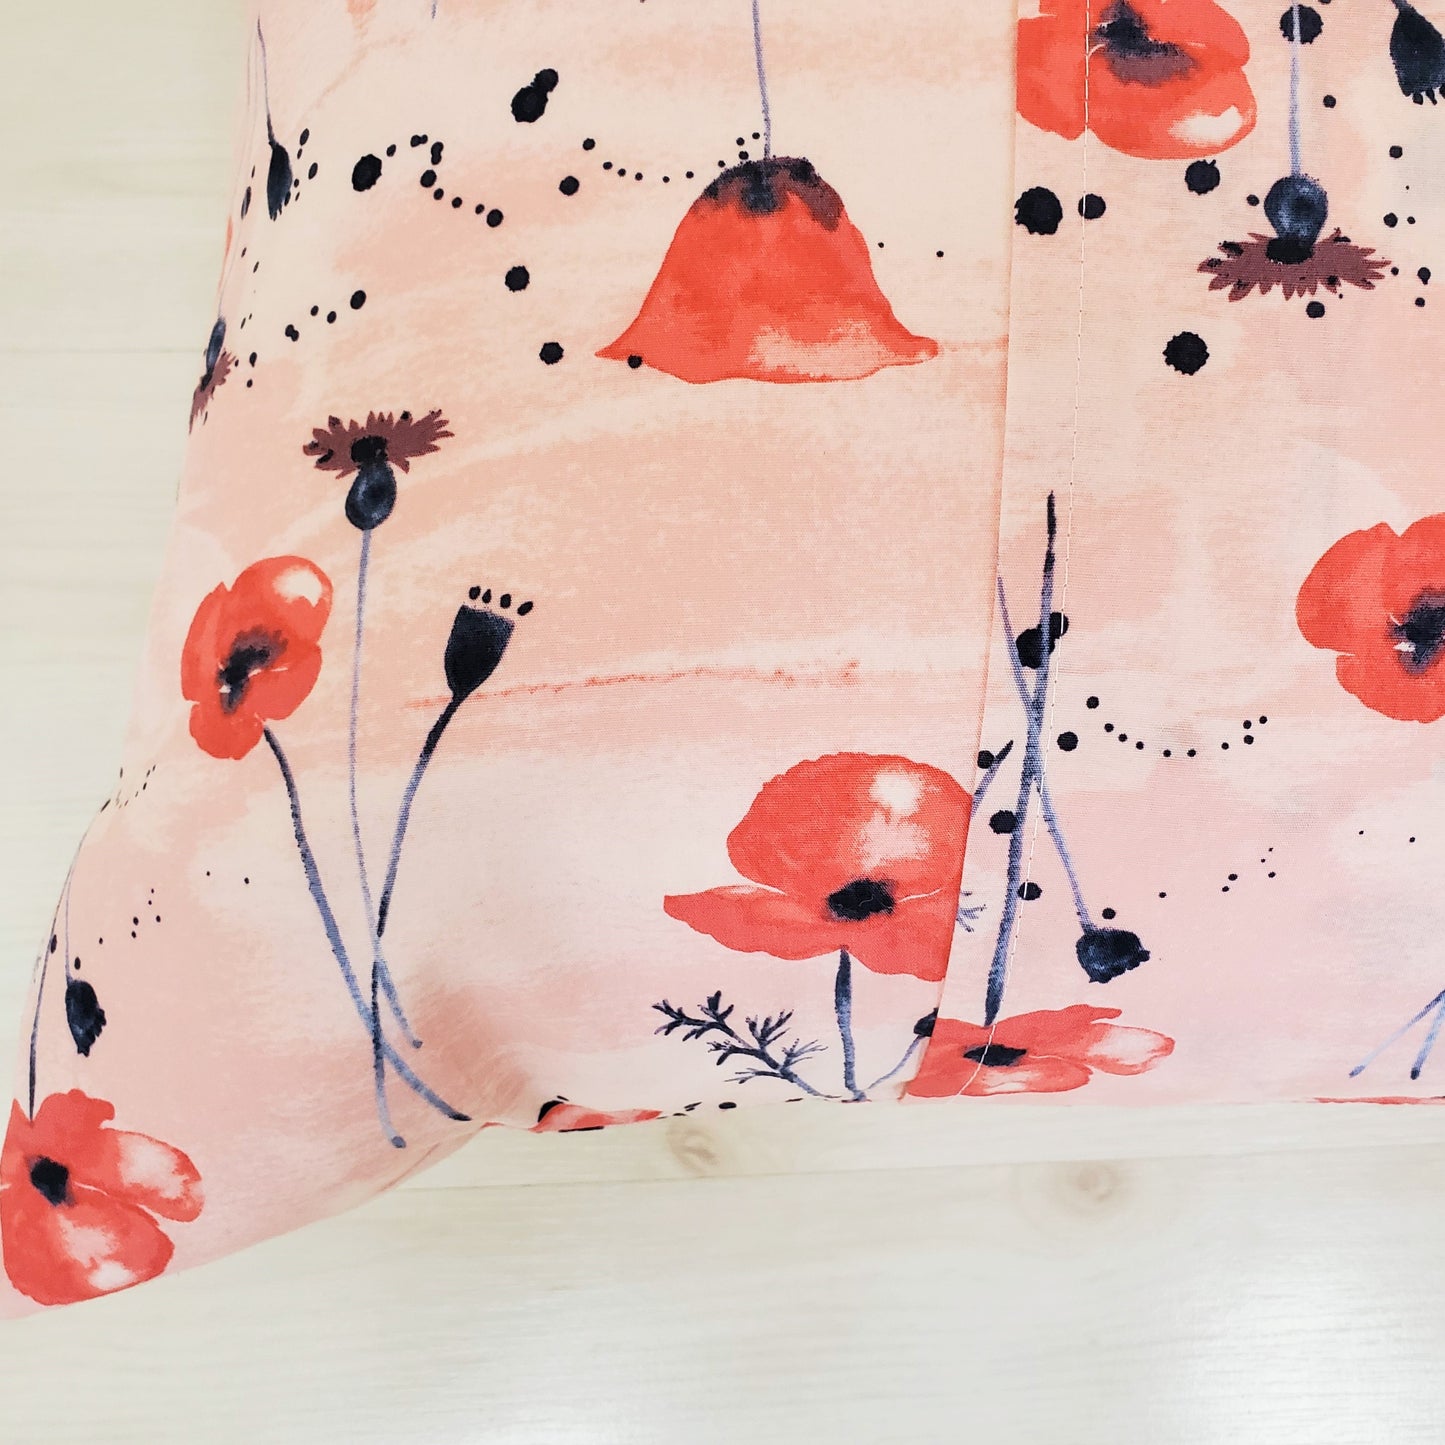 Organic Accent Pillow Cover with Poppies